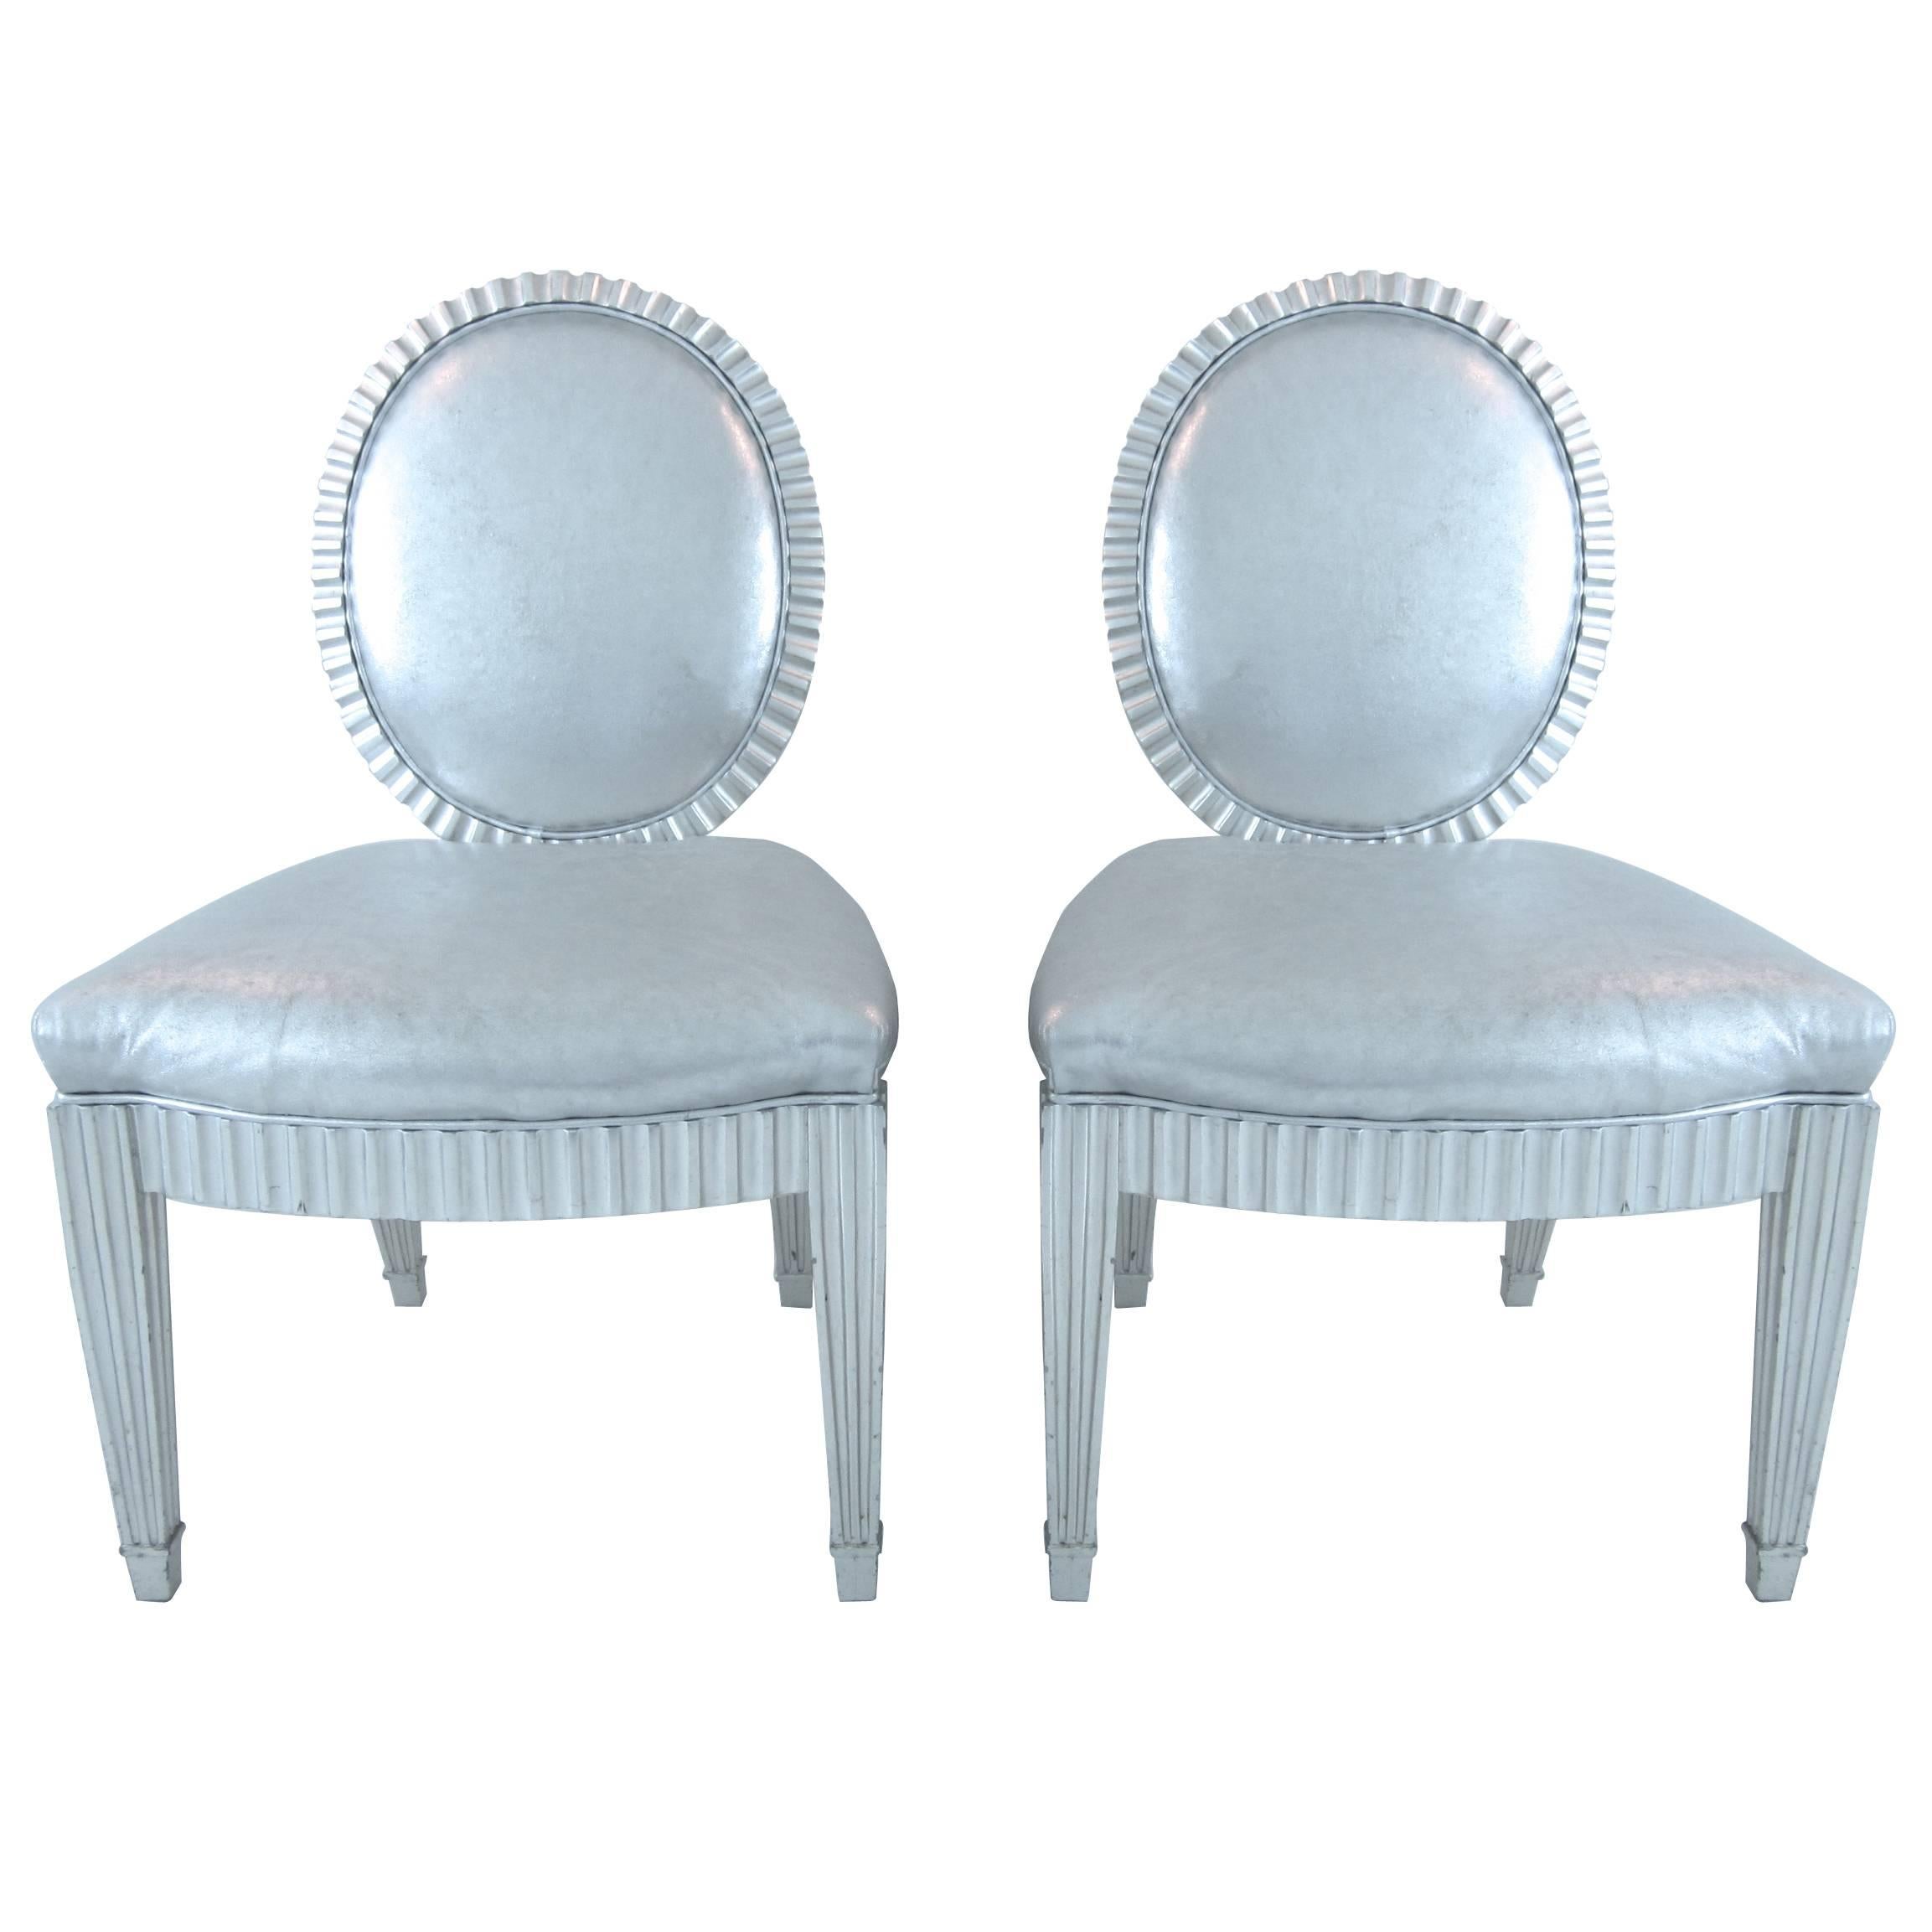 Neoclassic Silver Leaf and Silver Leather Chairs by John Hutton for Donghia, Pr. For Sale